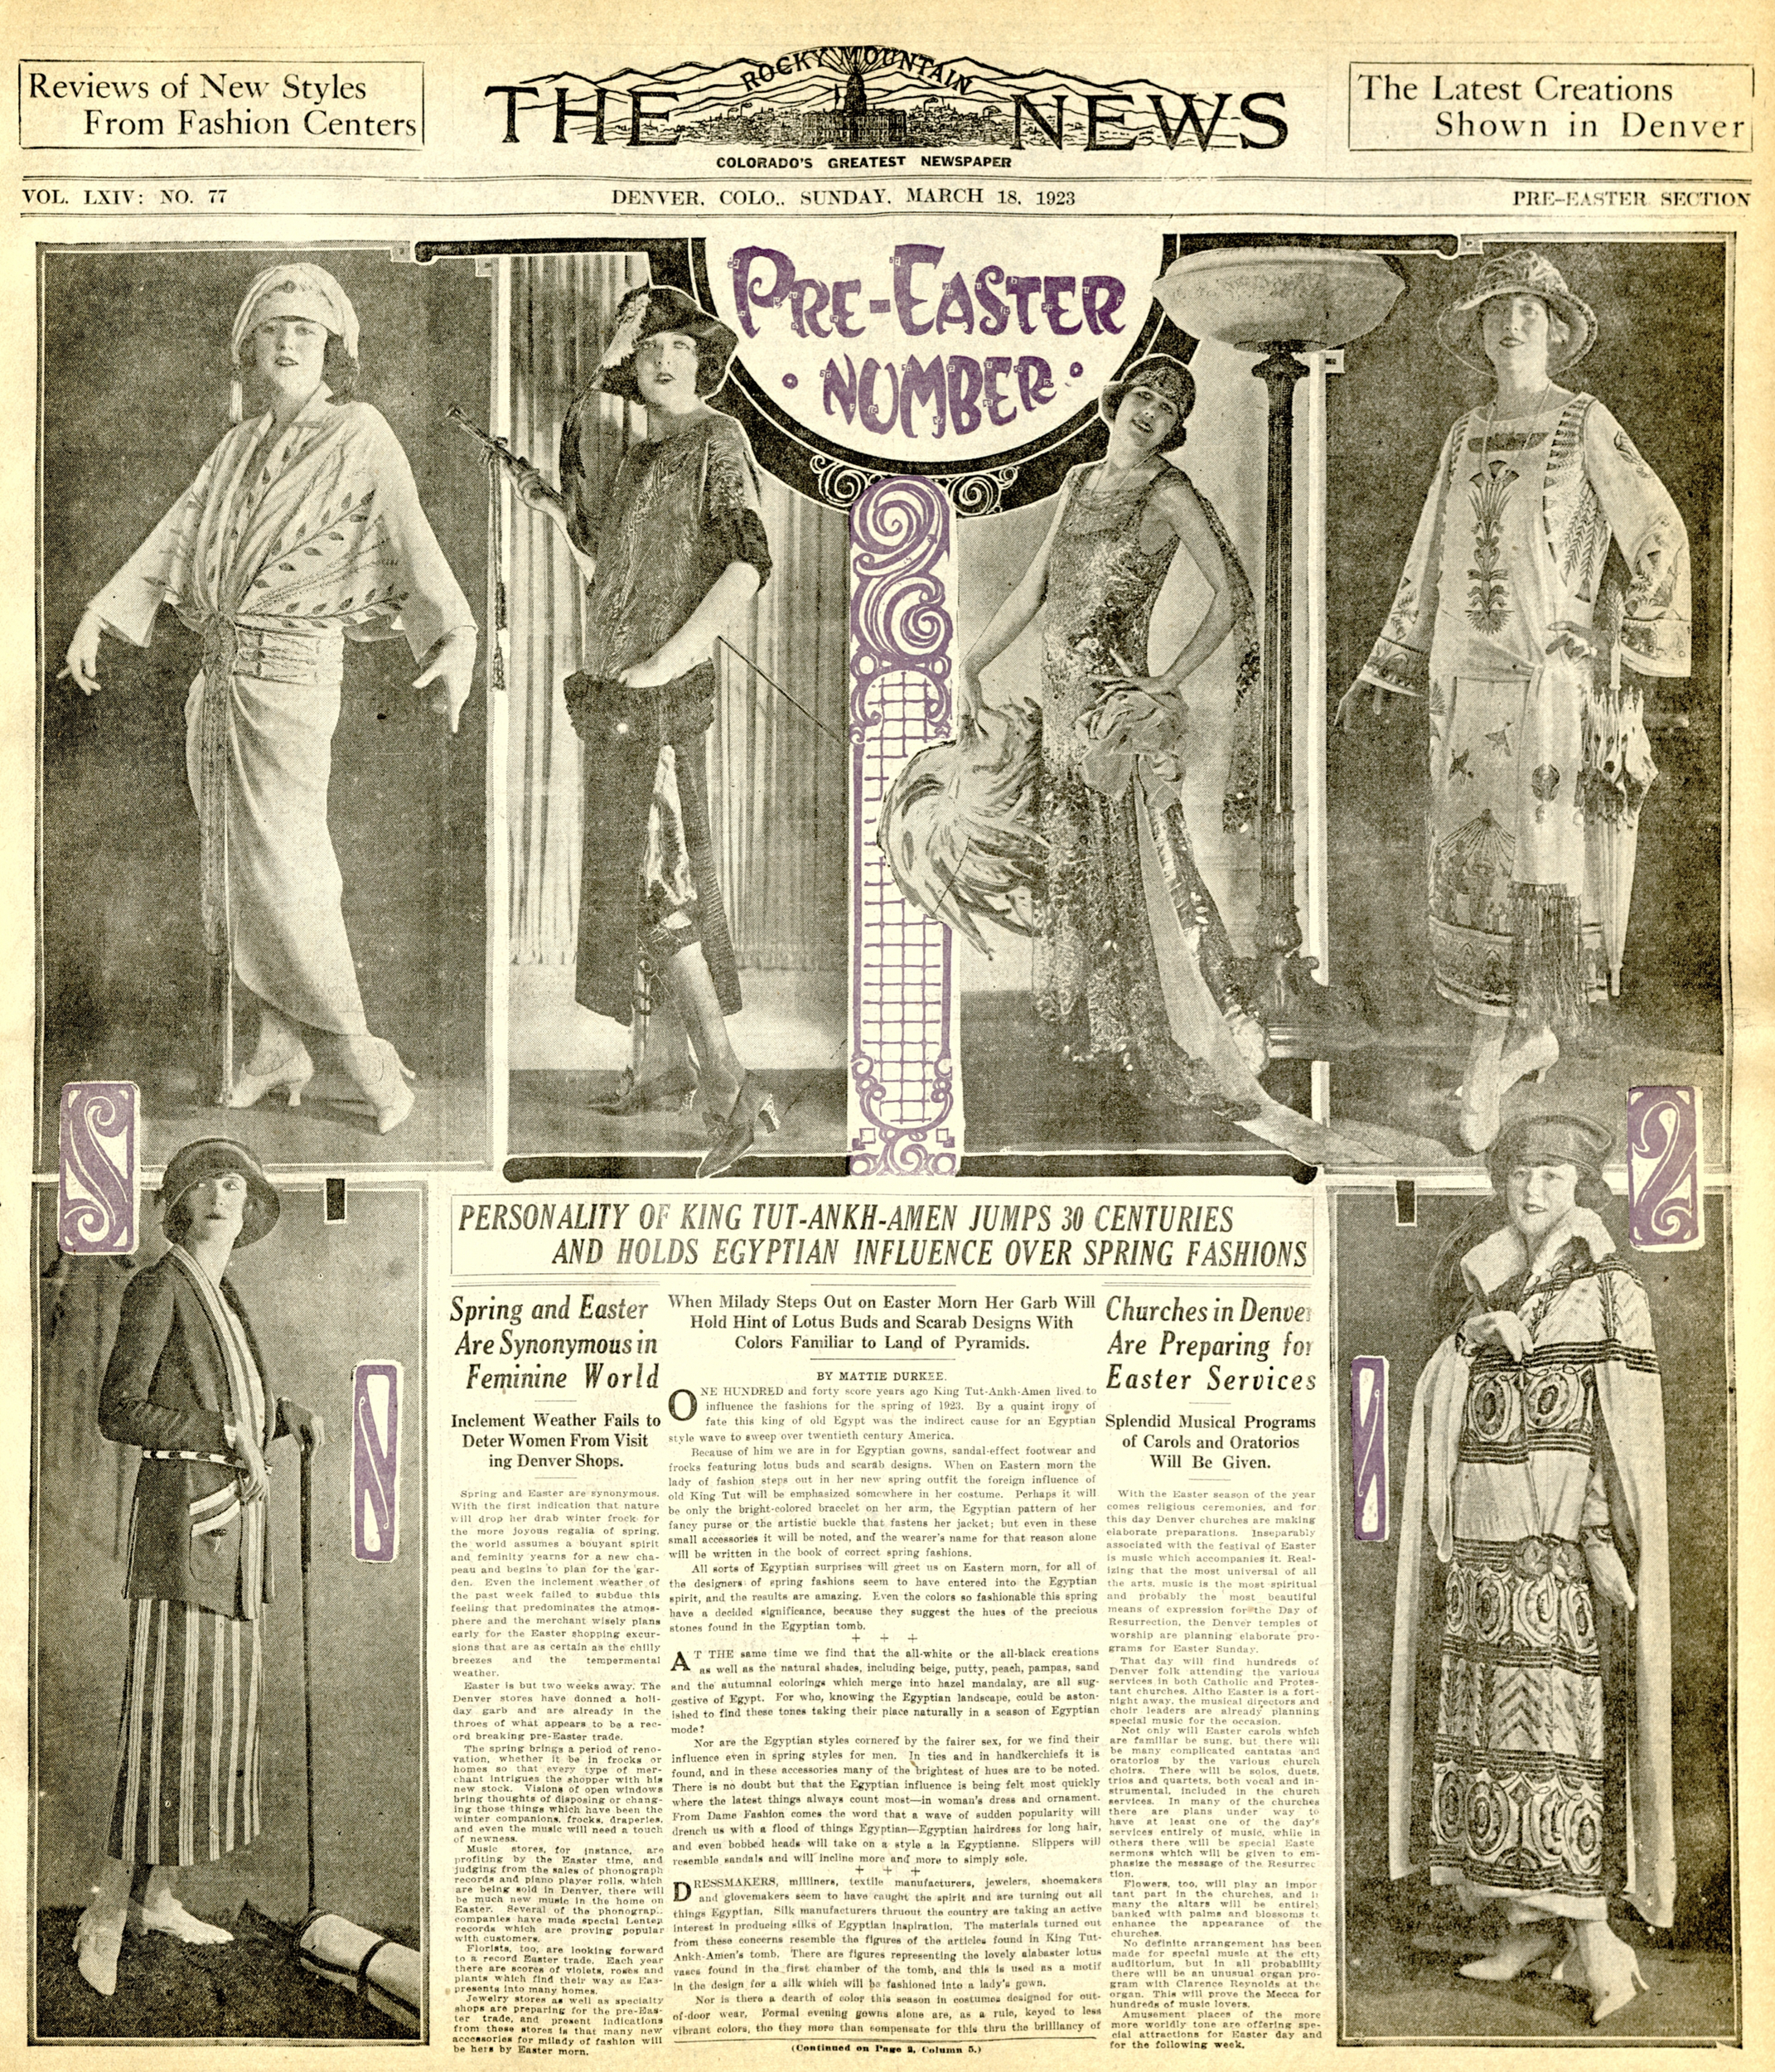 A newspaper clipping demonstrating King Tut inspired fashion